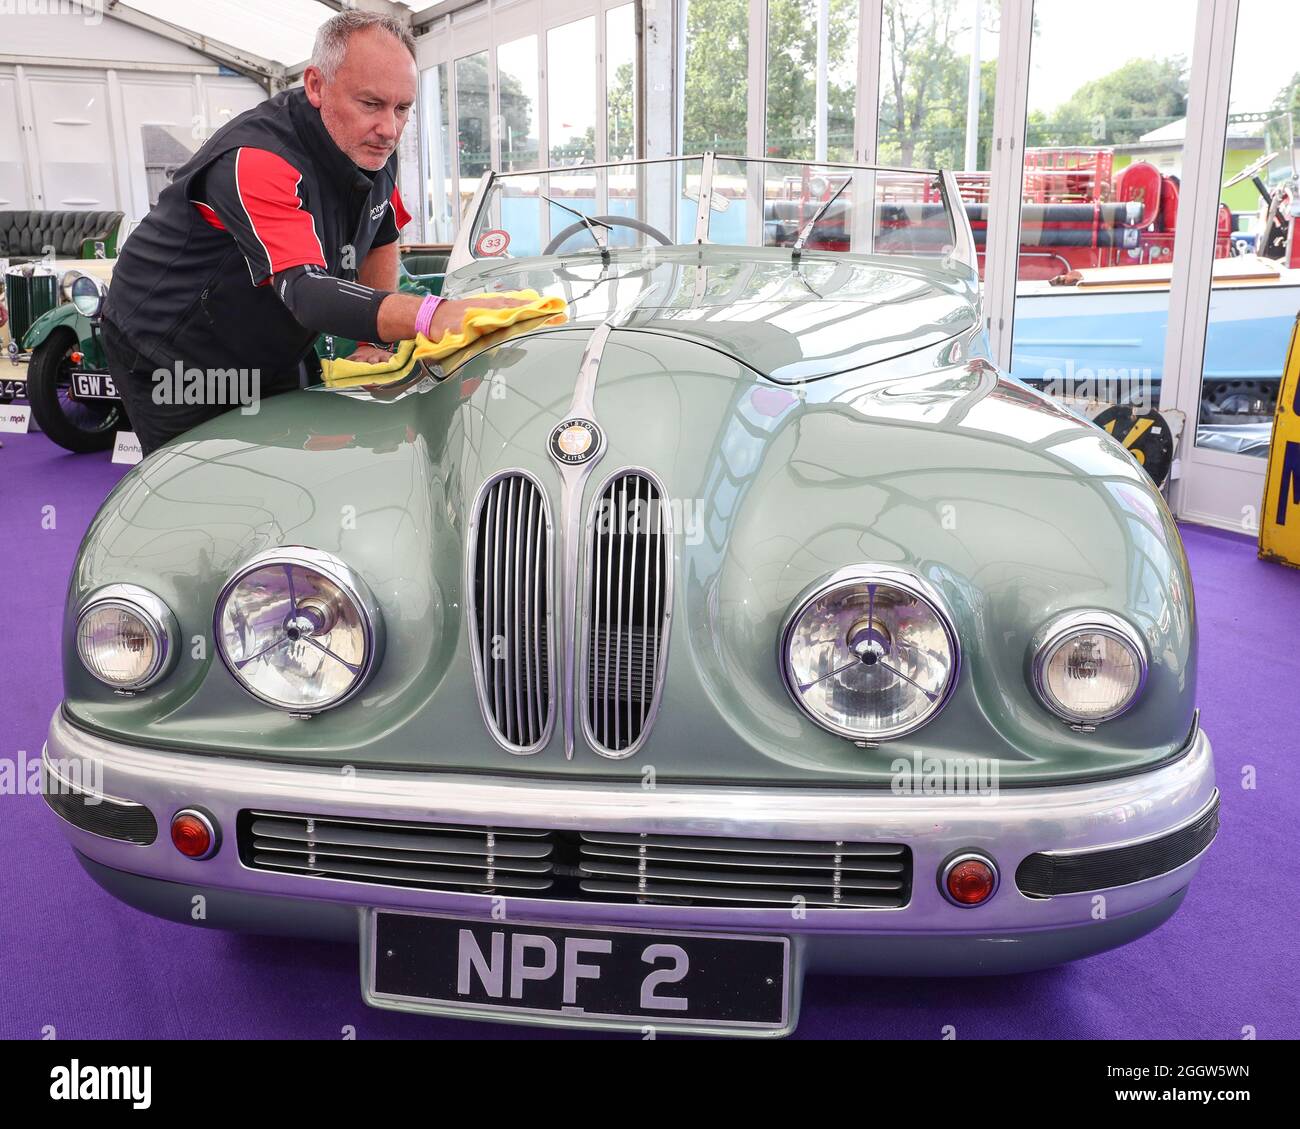 Beaulieu, Hampshire, UK 3rd September 2021. Jonathan Underwood gives a final polish to rare 1949 Bristol 402 Drophead Coupé formally owned by Hollywood actress Jean Simmons, which is to be offered at auction at the Bonhams MPH Beaulieu Sale this Sunday, with an estimate of £150,000 – 200,000. One of the most glamorous luxury motor cars of its day, the Bristol was bought new for the Hollywood actress by her future husband and fellow star Stewart Granger as one of a matching pair. Credit: Stuart Martin/Alamy Live News Stock Photo